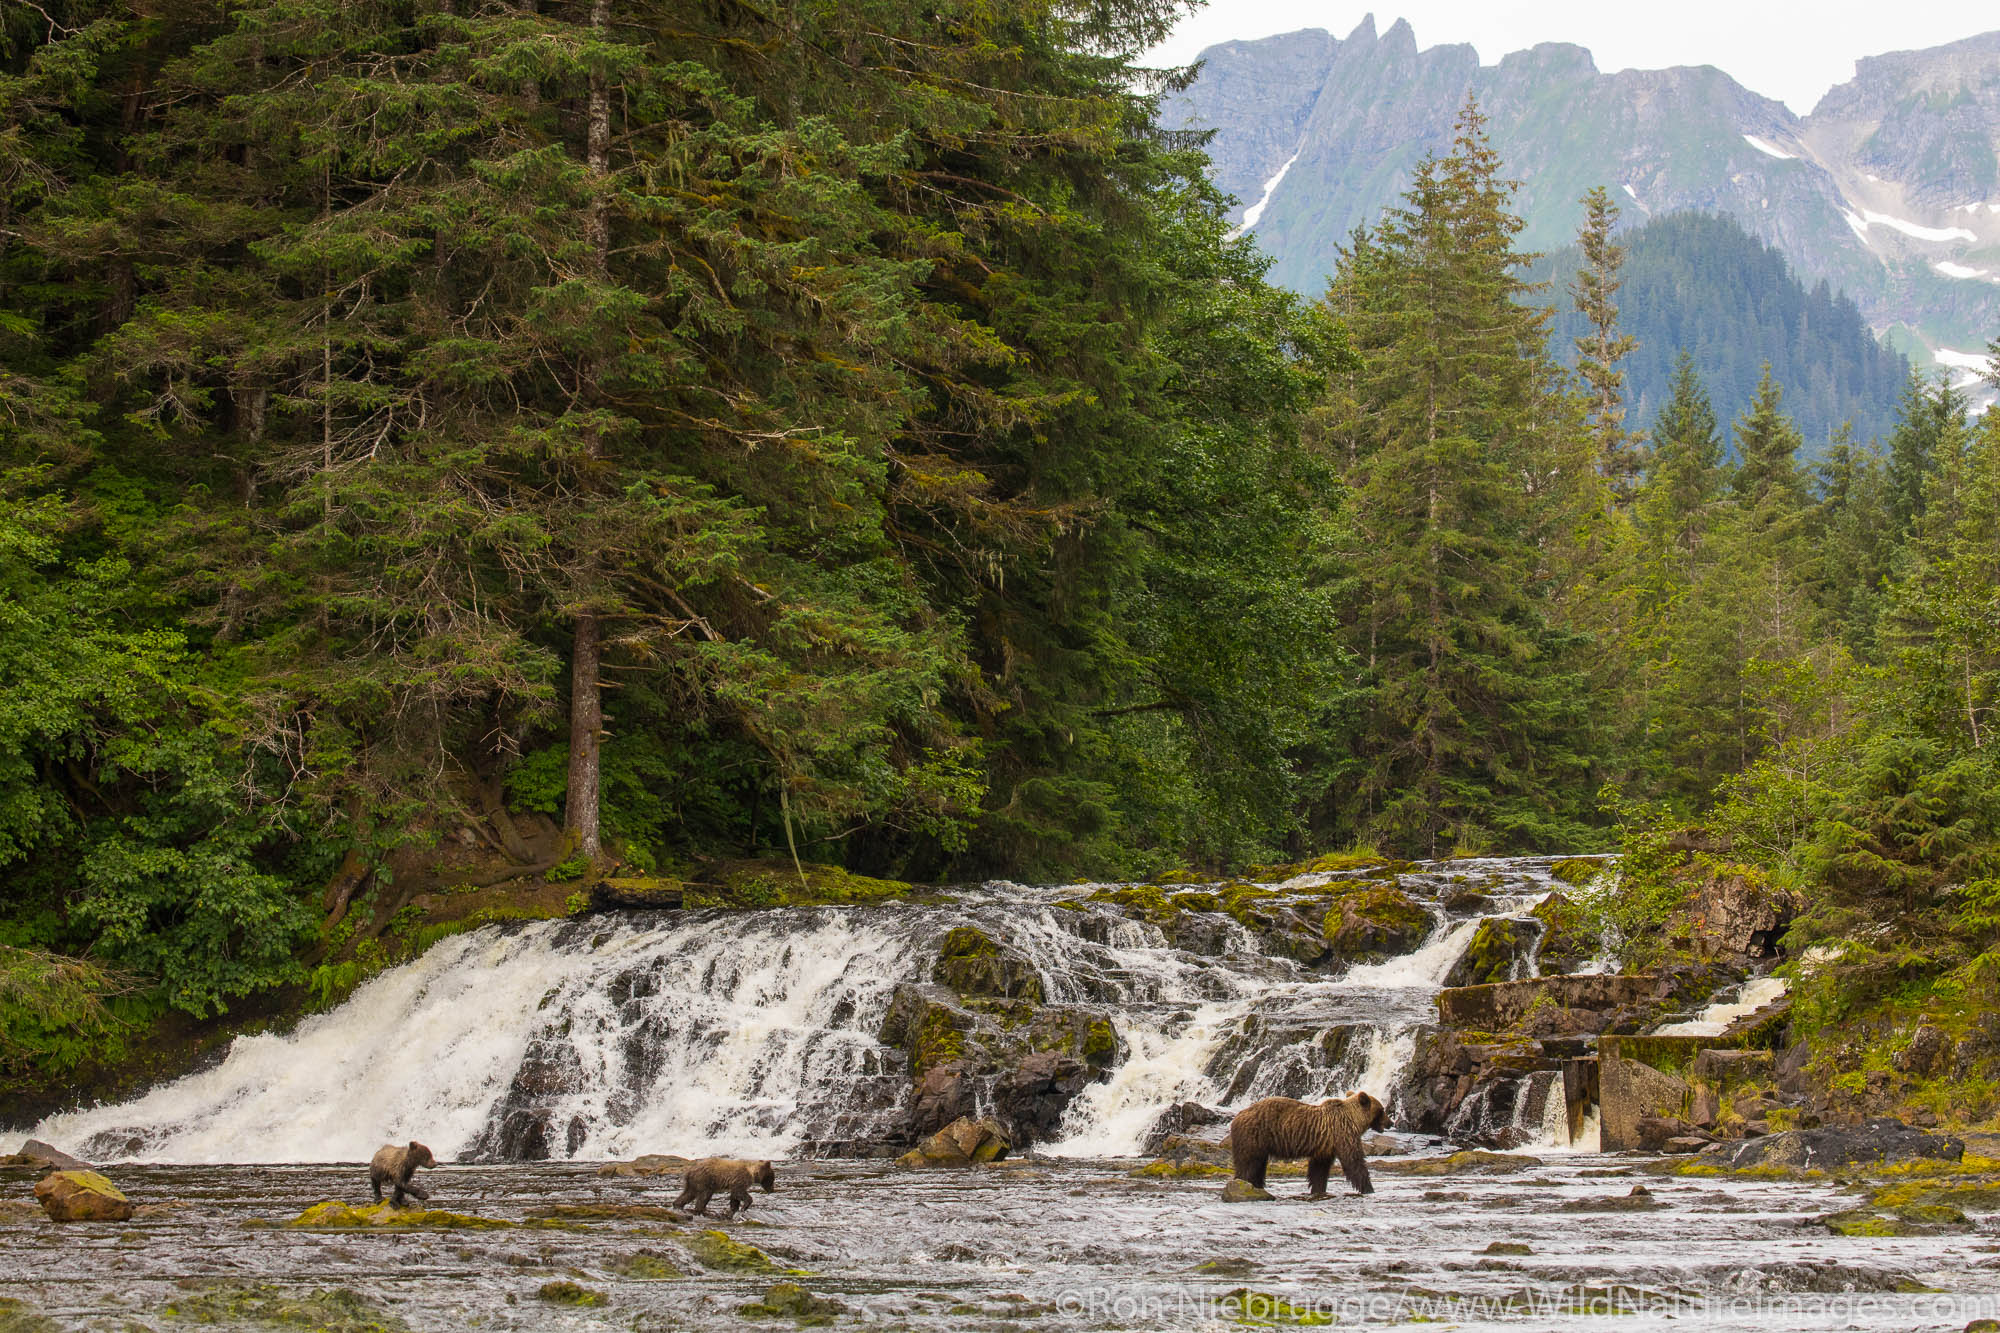 Grizzly Bear sow with cubs fishing, Tongass National Forest, Alaska